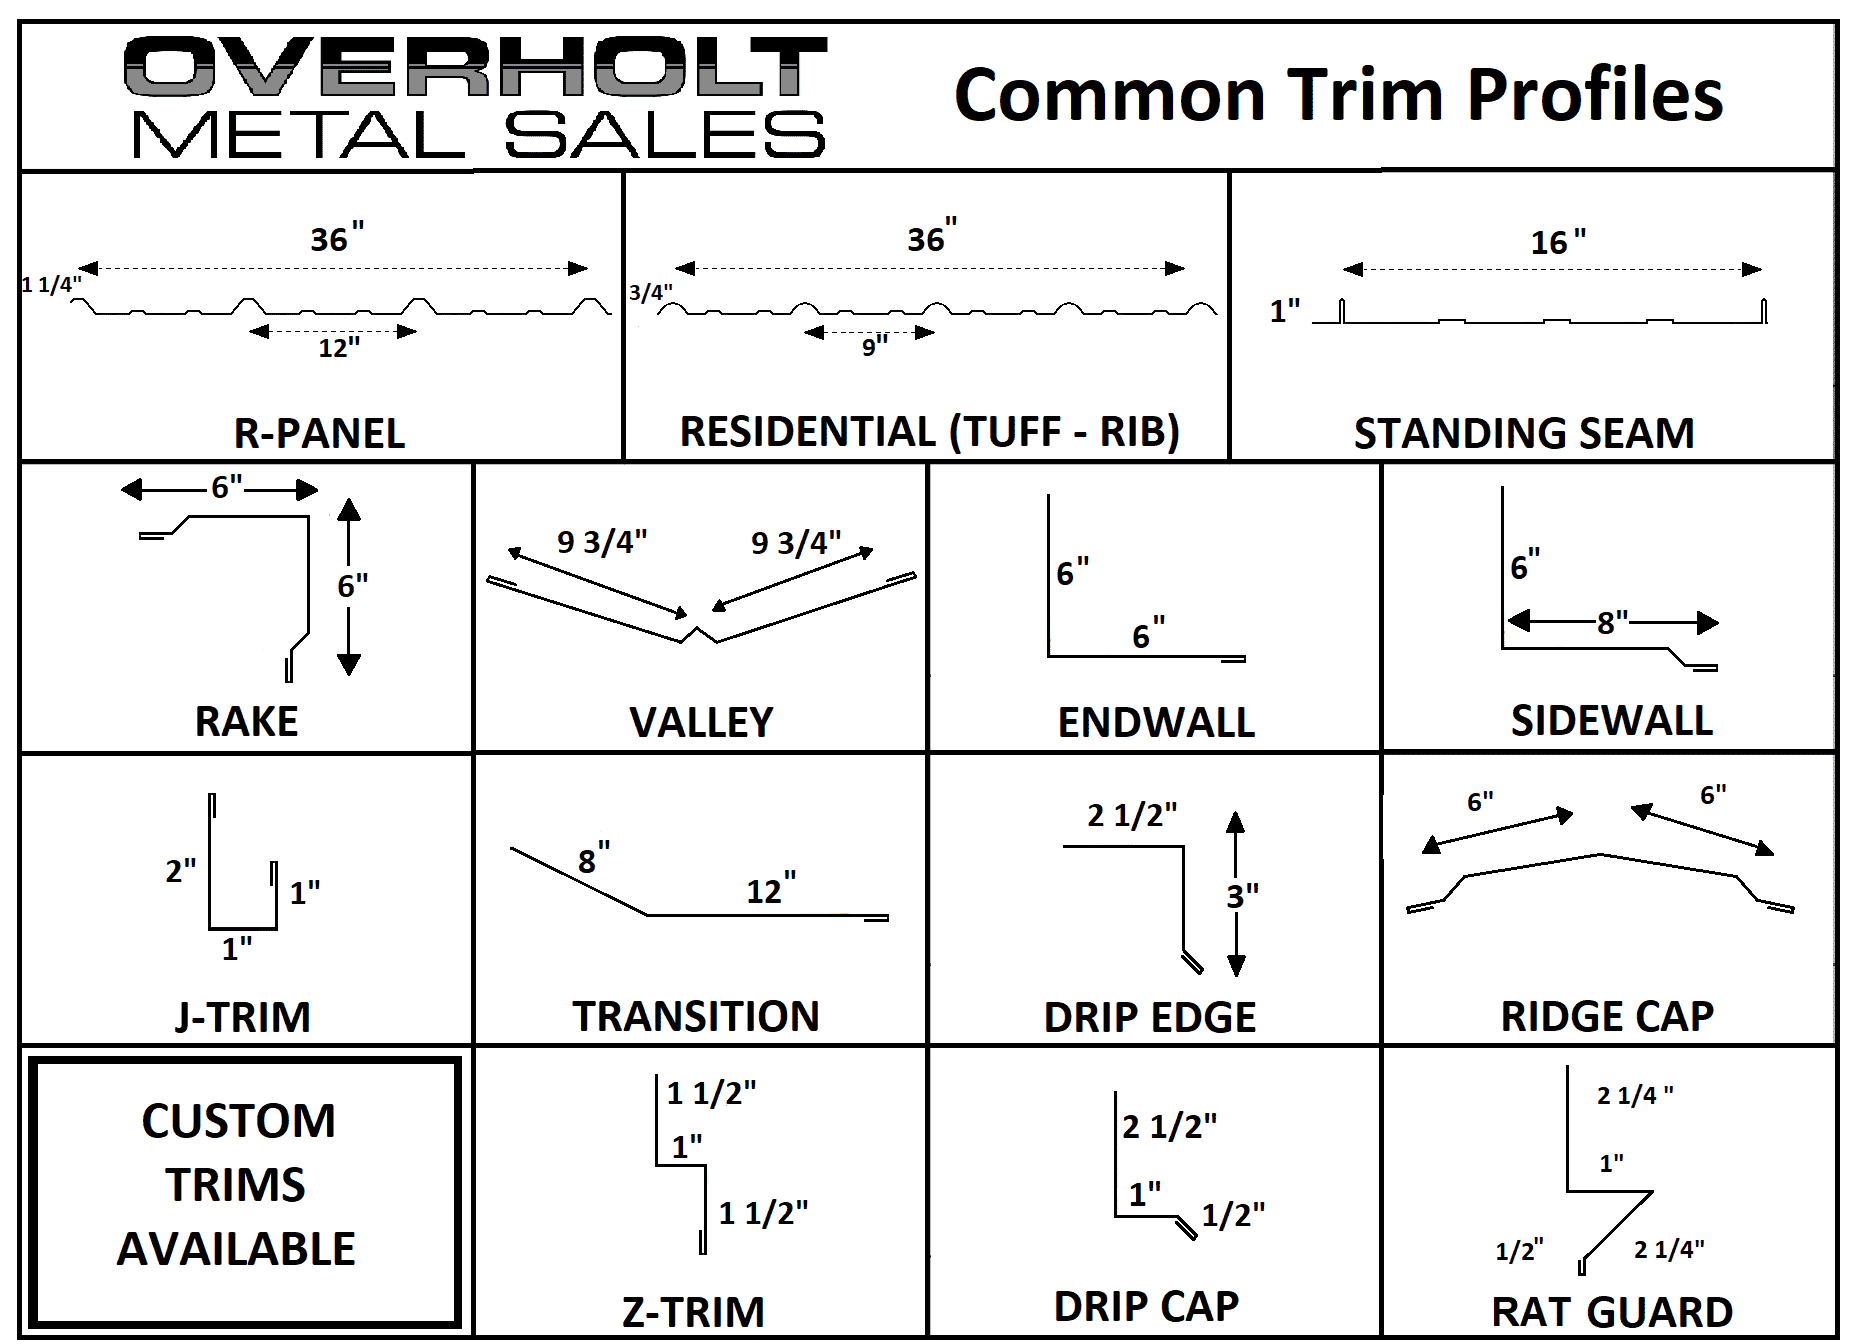 Common Trim Profiles for Metal Roofing